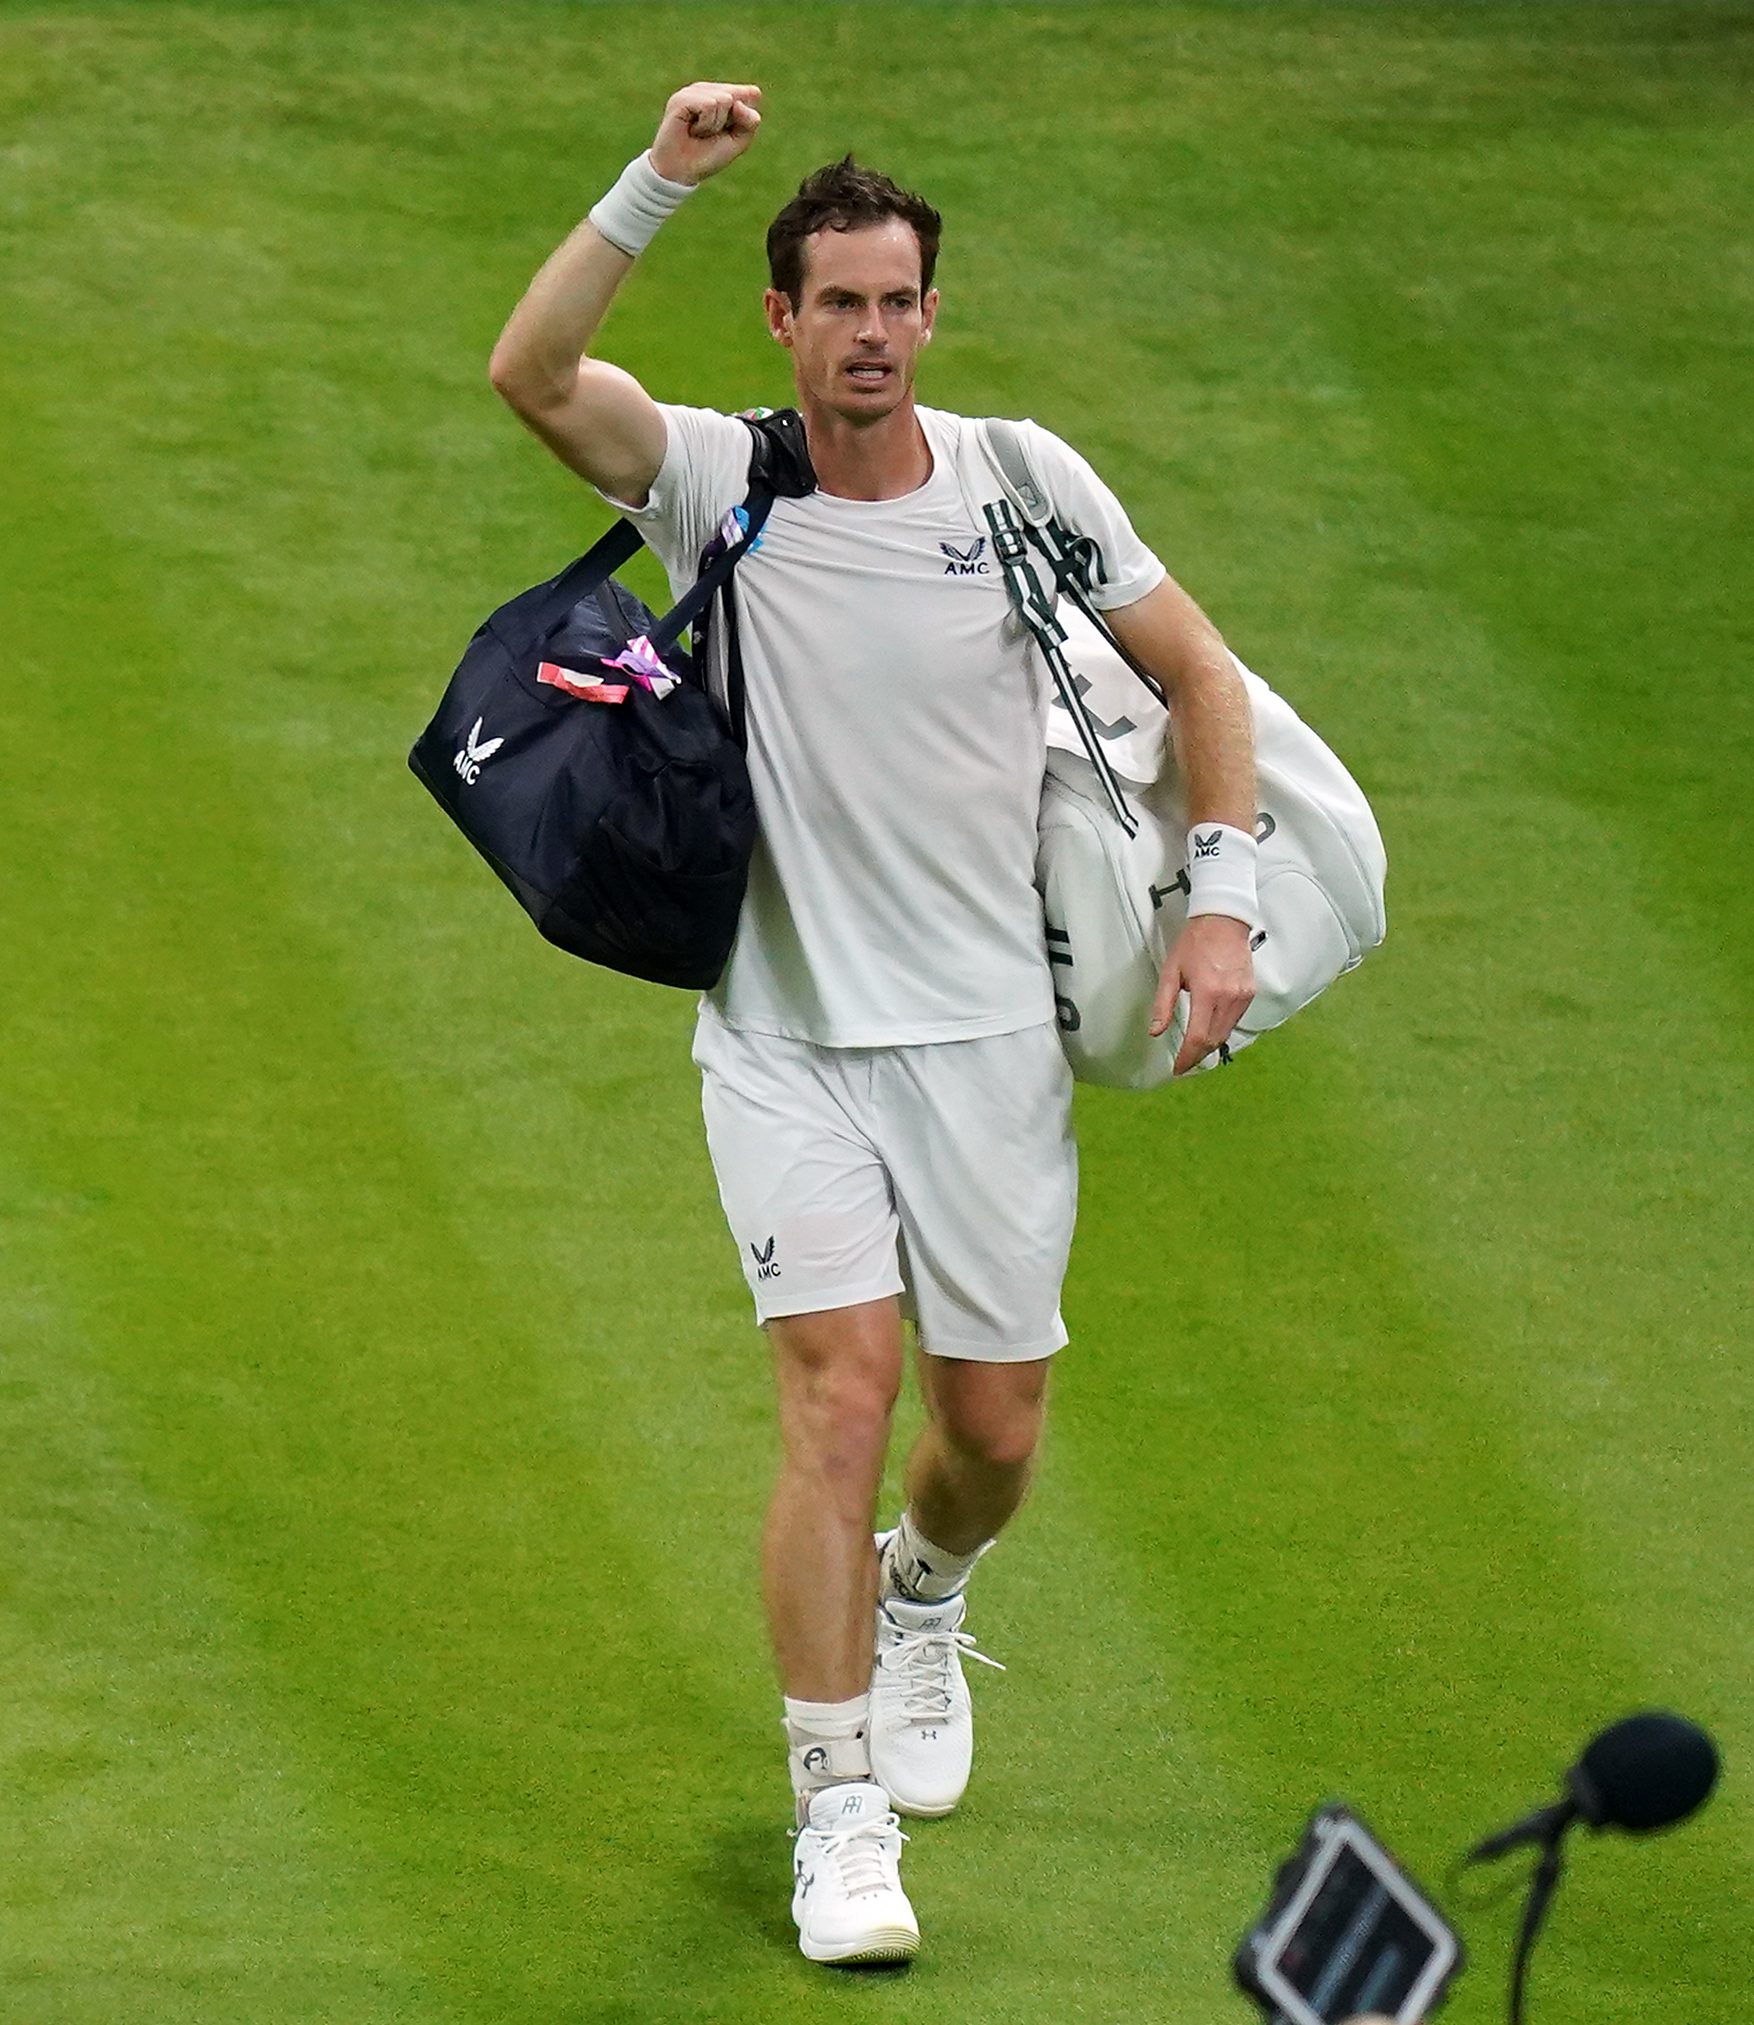 Andy Murray halted by Wimbledon curfew after Liam Broady and Katie Boulter wins